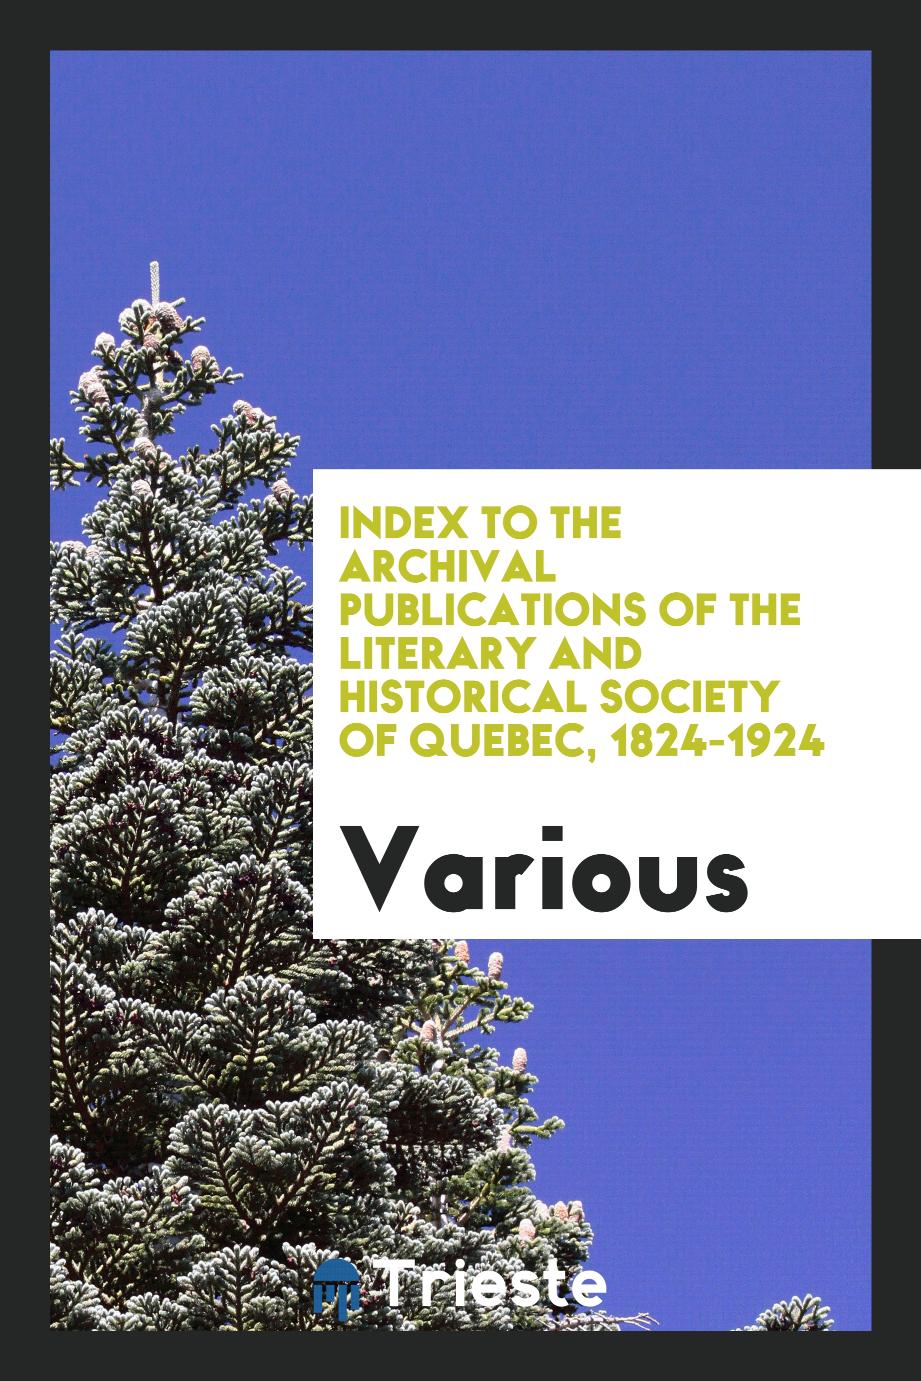 Index to the archival publications of the Literary and Historical Society of Quebec, 1824-1924